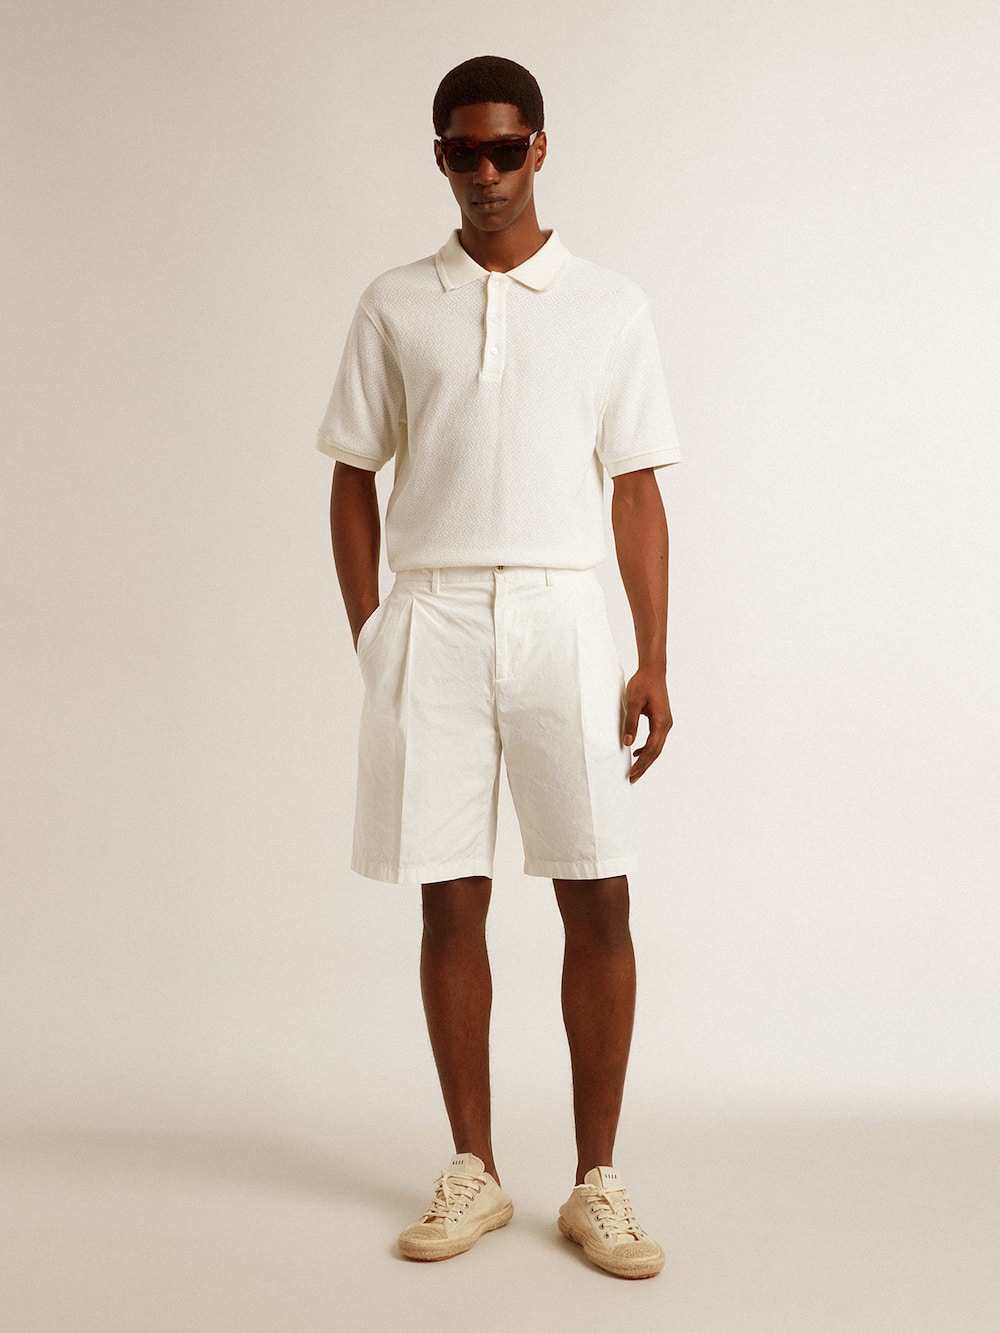 Golden Goose - Men's polo shirt in white cotton with mother-of-pearl buttons in 